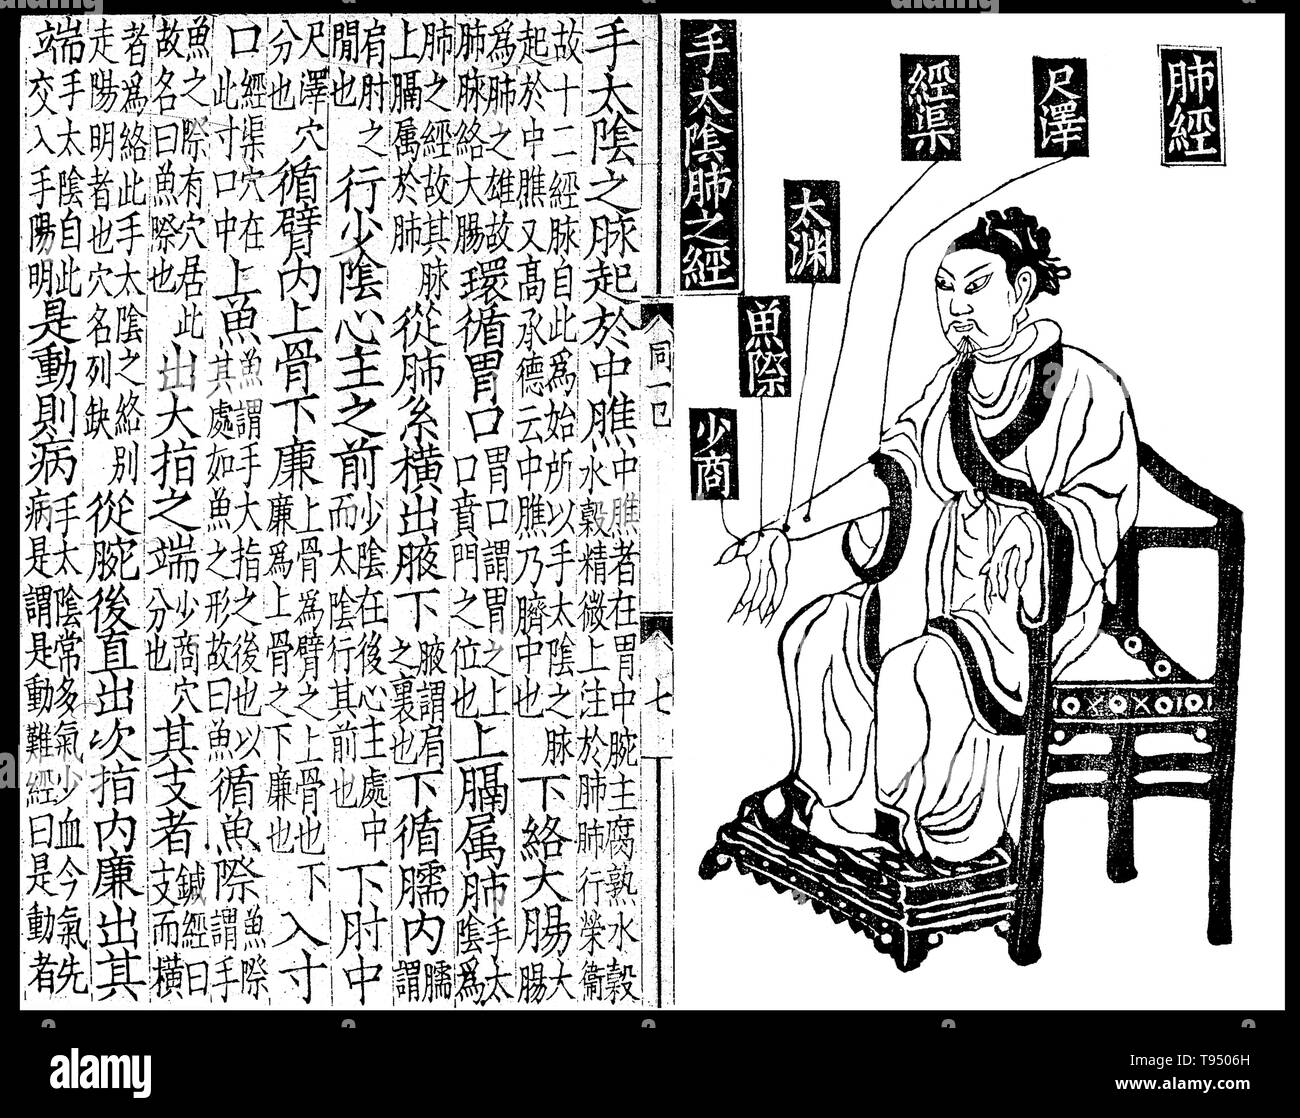 Woodblock illustration from an edition of 1909 (1st year of the Xuantong reign period of the Qing dynasty) showing points on the lung channel of arm taiyin. From the 11th century classic Bu zhu tongren shuxue zhenjiu tujing (Illustrated Acupuncture and Moxibustion Canon of the Bronze Man with Notes and Commentary) by Wang Weiyi. The labelled points are chize (Foot Marsh), jingqu (Channel Ditch), taiyuan (Great Abyss), yuji (Fish Border) and shaoshang (Lesser Shang). Stock Photo